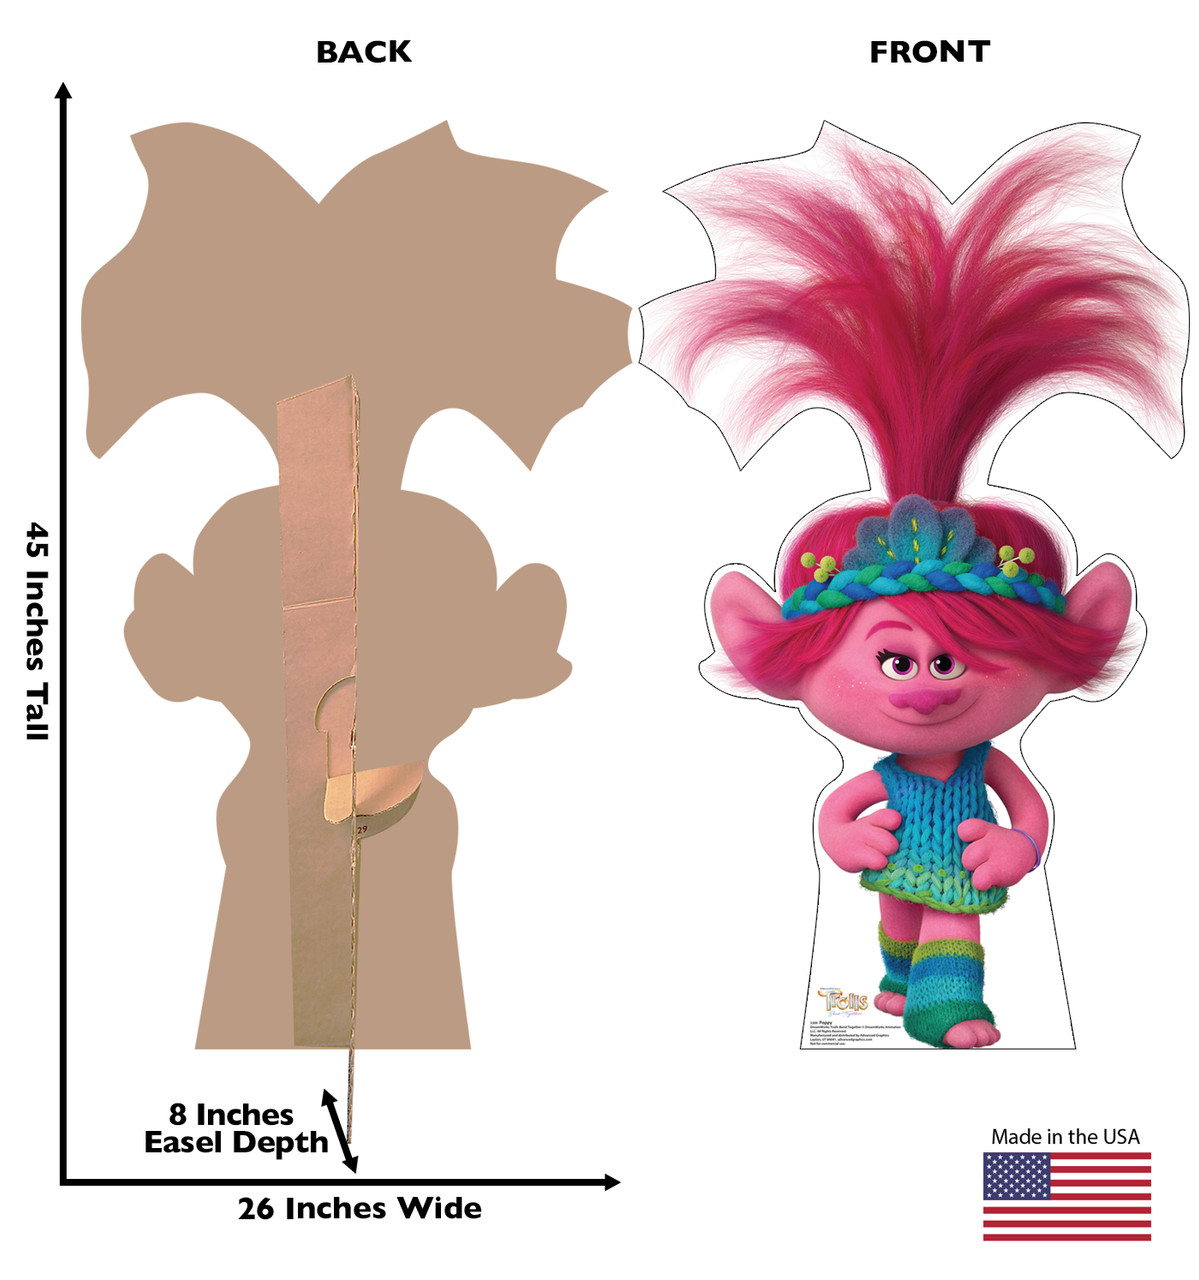 Life-size cardboard standee of Poppy with back and front dimensions.